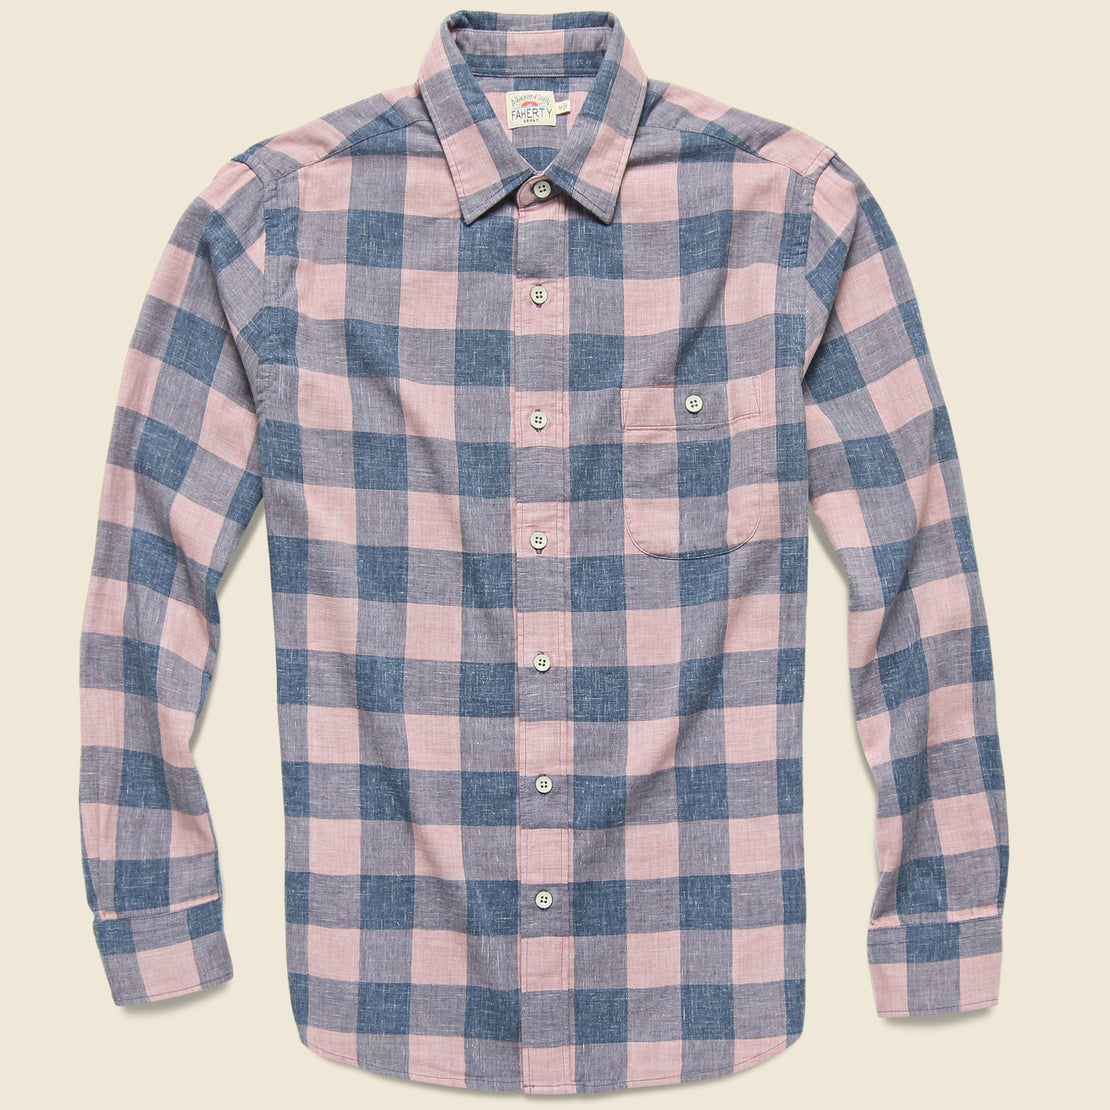 Faherty Faherty - L/S Doublecloth Seaview Shirt, SS19